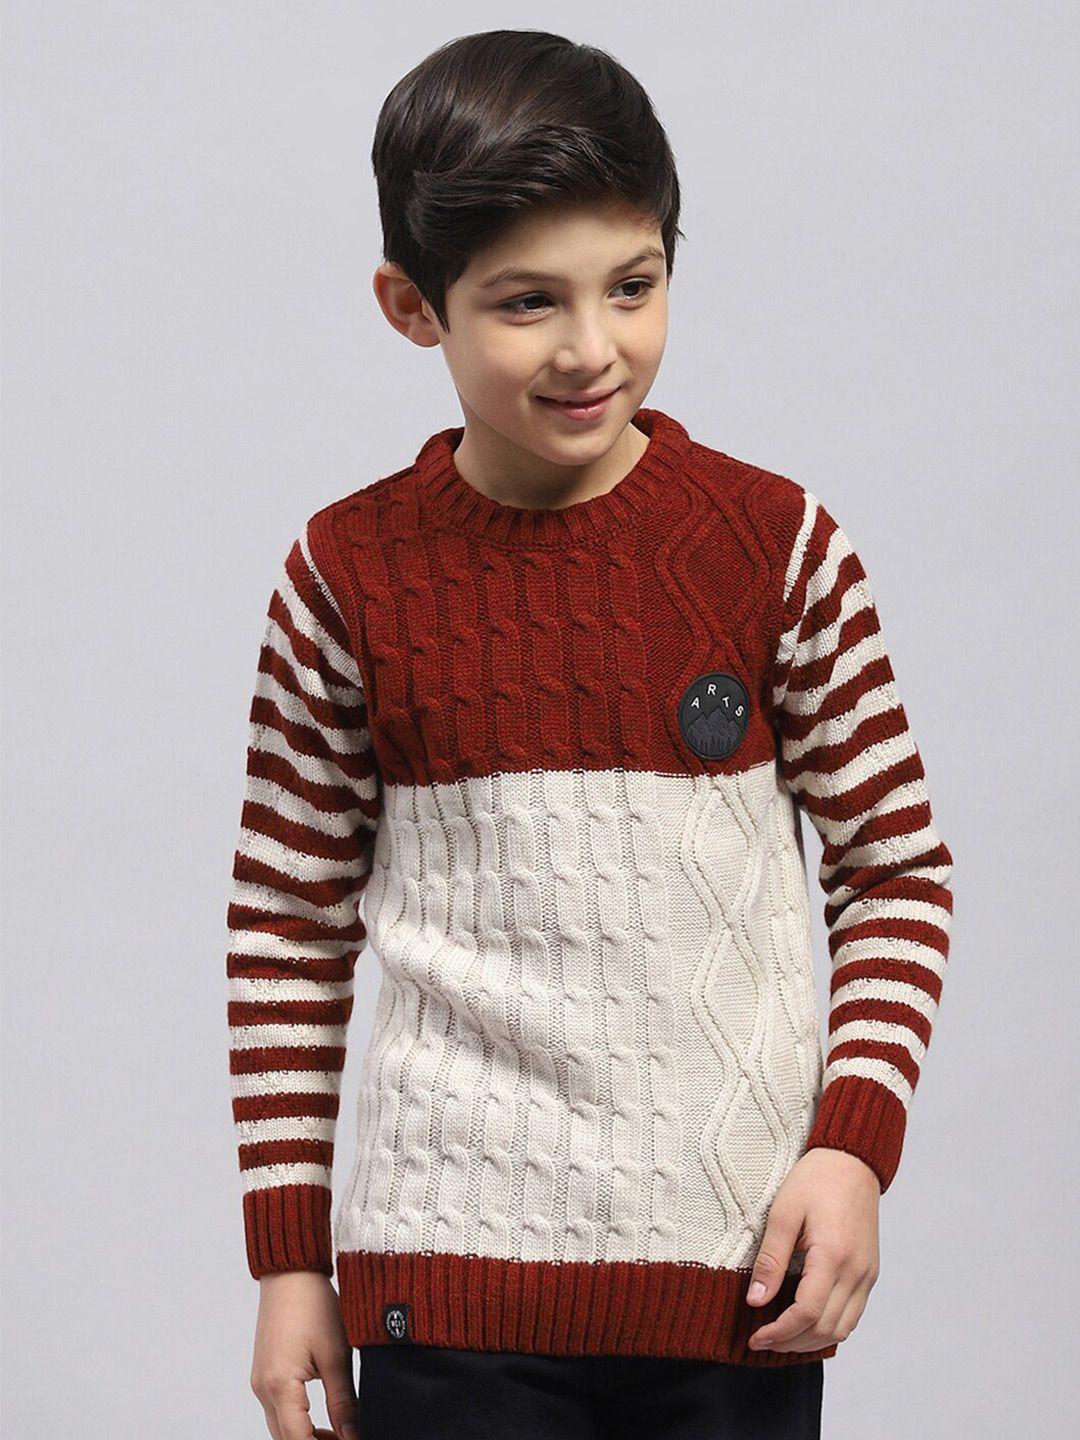 monte carlo boys round neck acrylic cable knit pullover